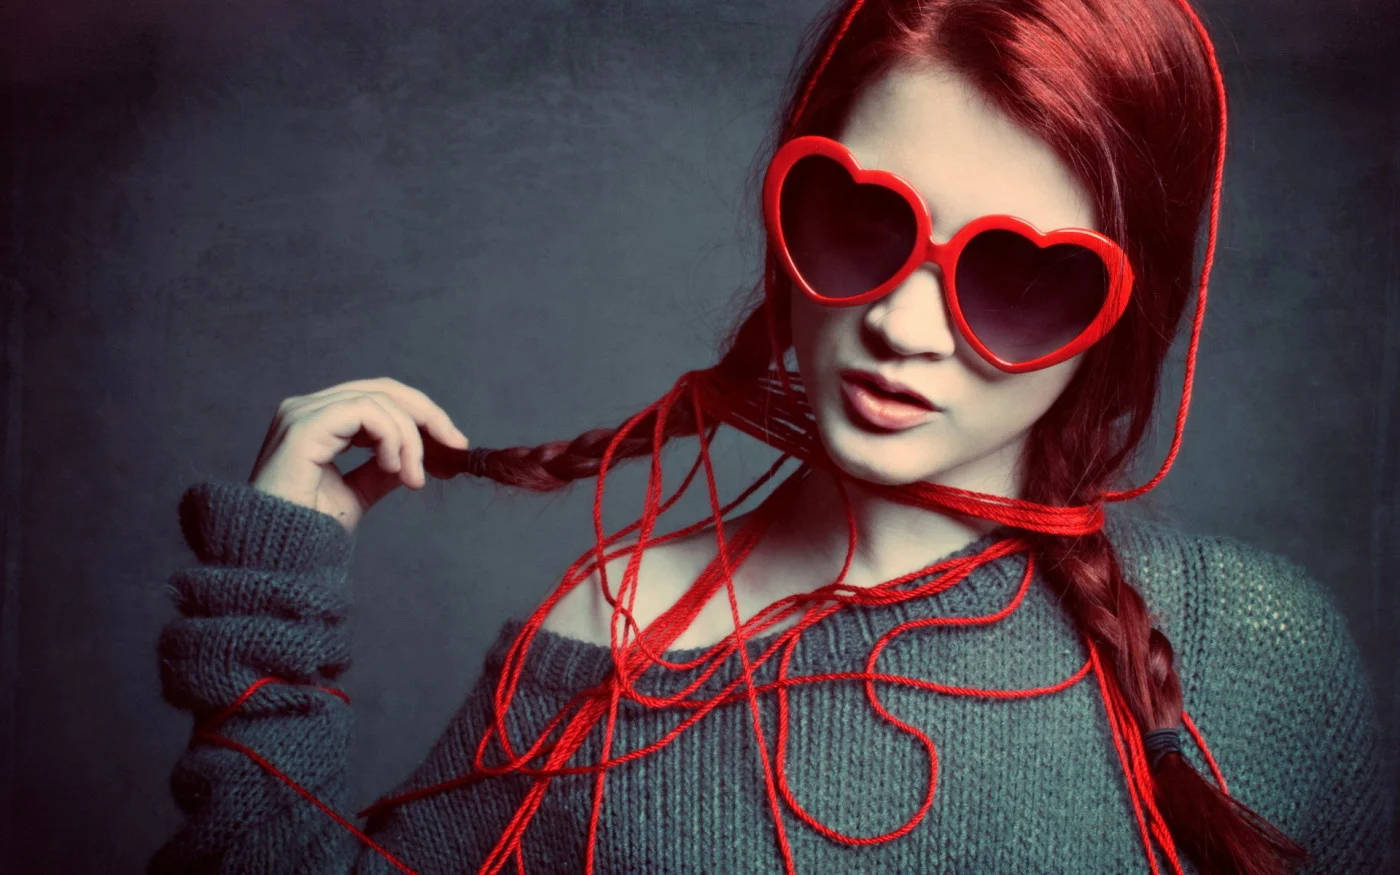 Download Cool Attitude Girl With Braided Red Hair Wallpaper 